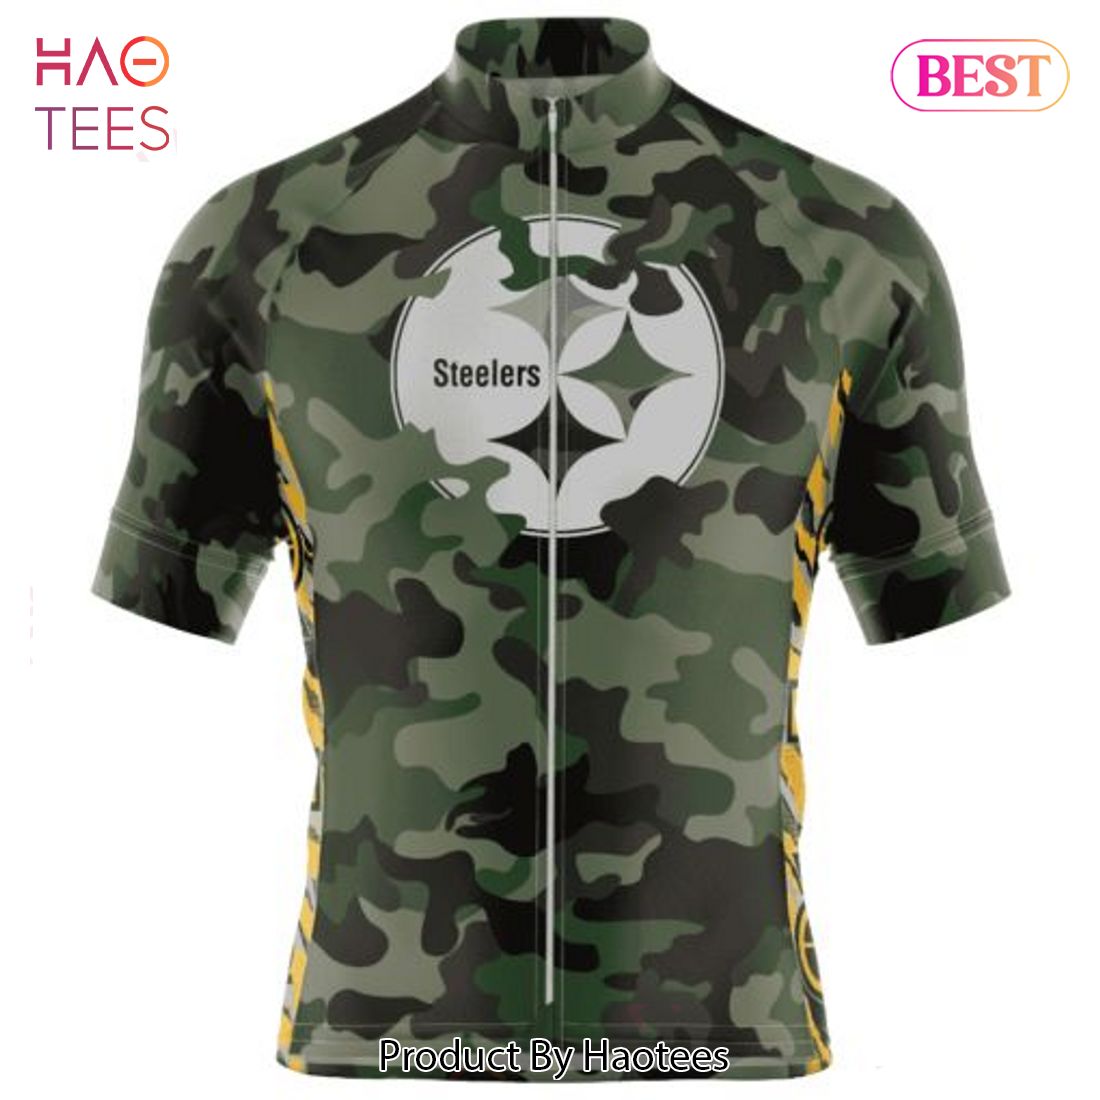 THE BEST NFL Pittsburgh Steelers Special Camo Design Cycling Jersey Hoodie